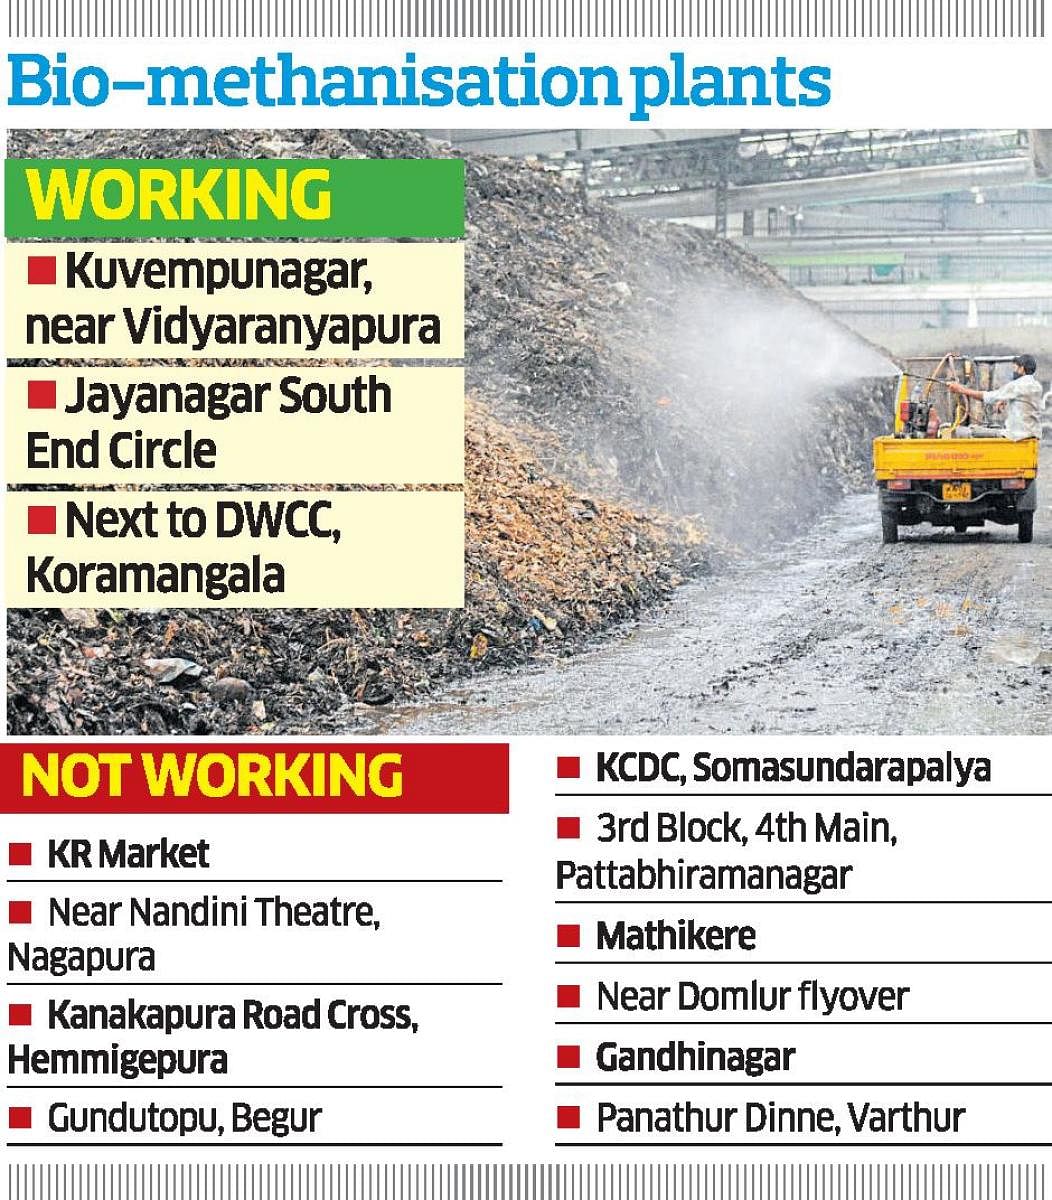 Most waste-to-energy plants idle as BBMP drags its feet